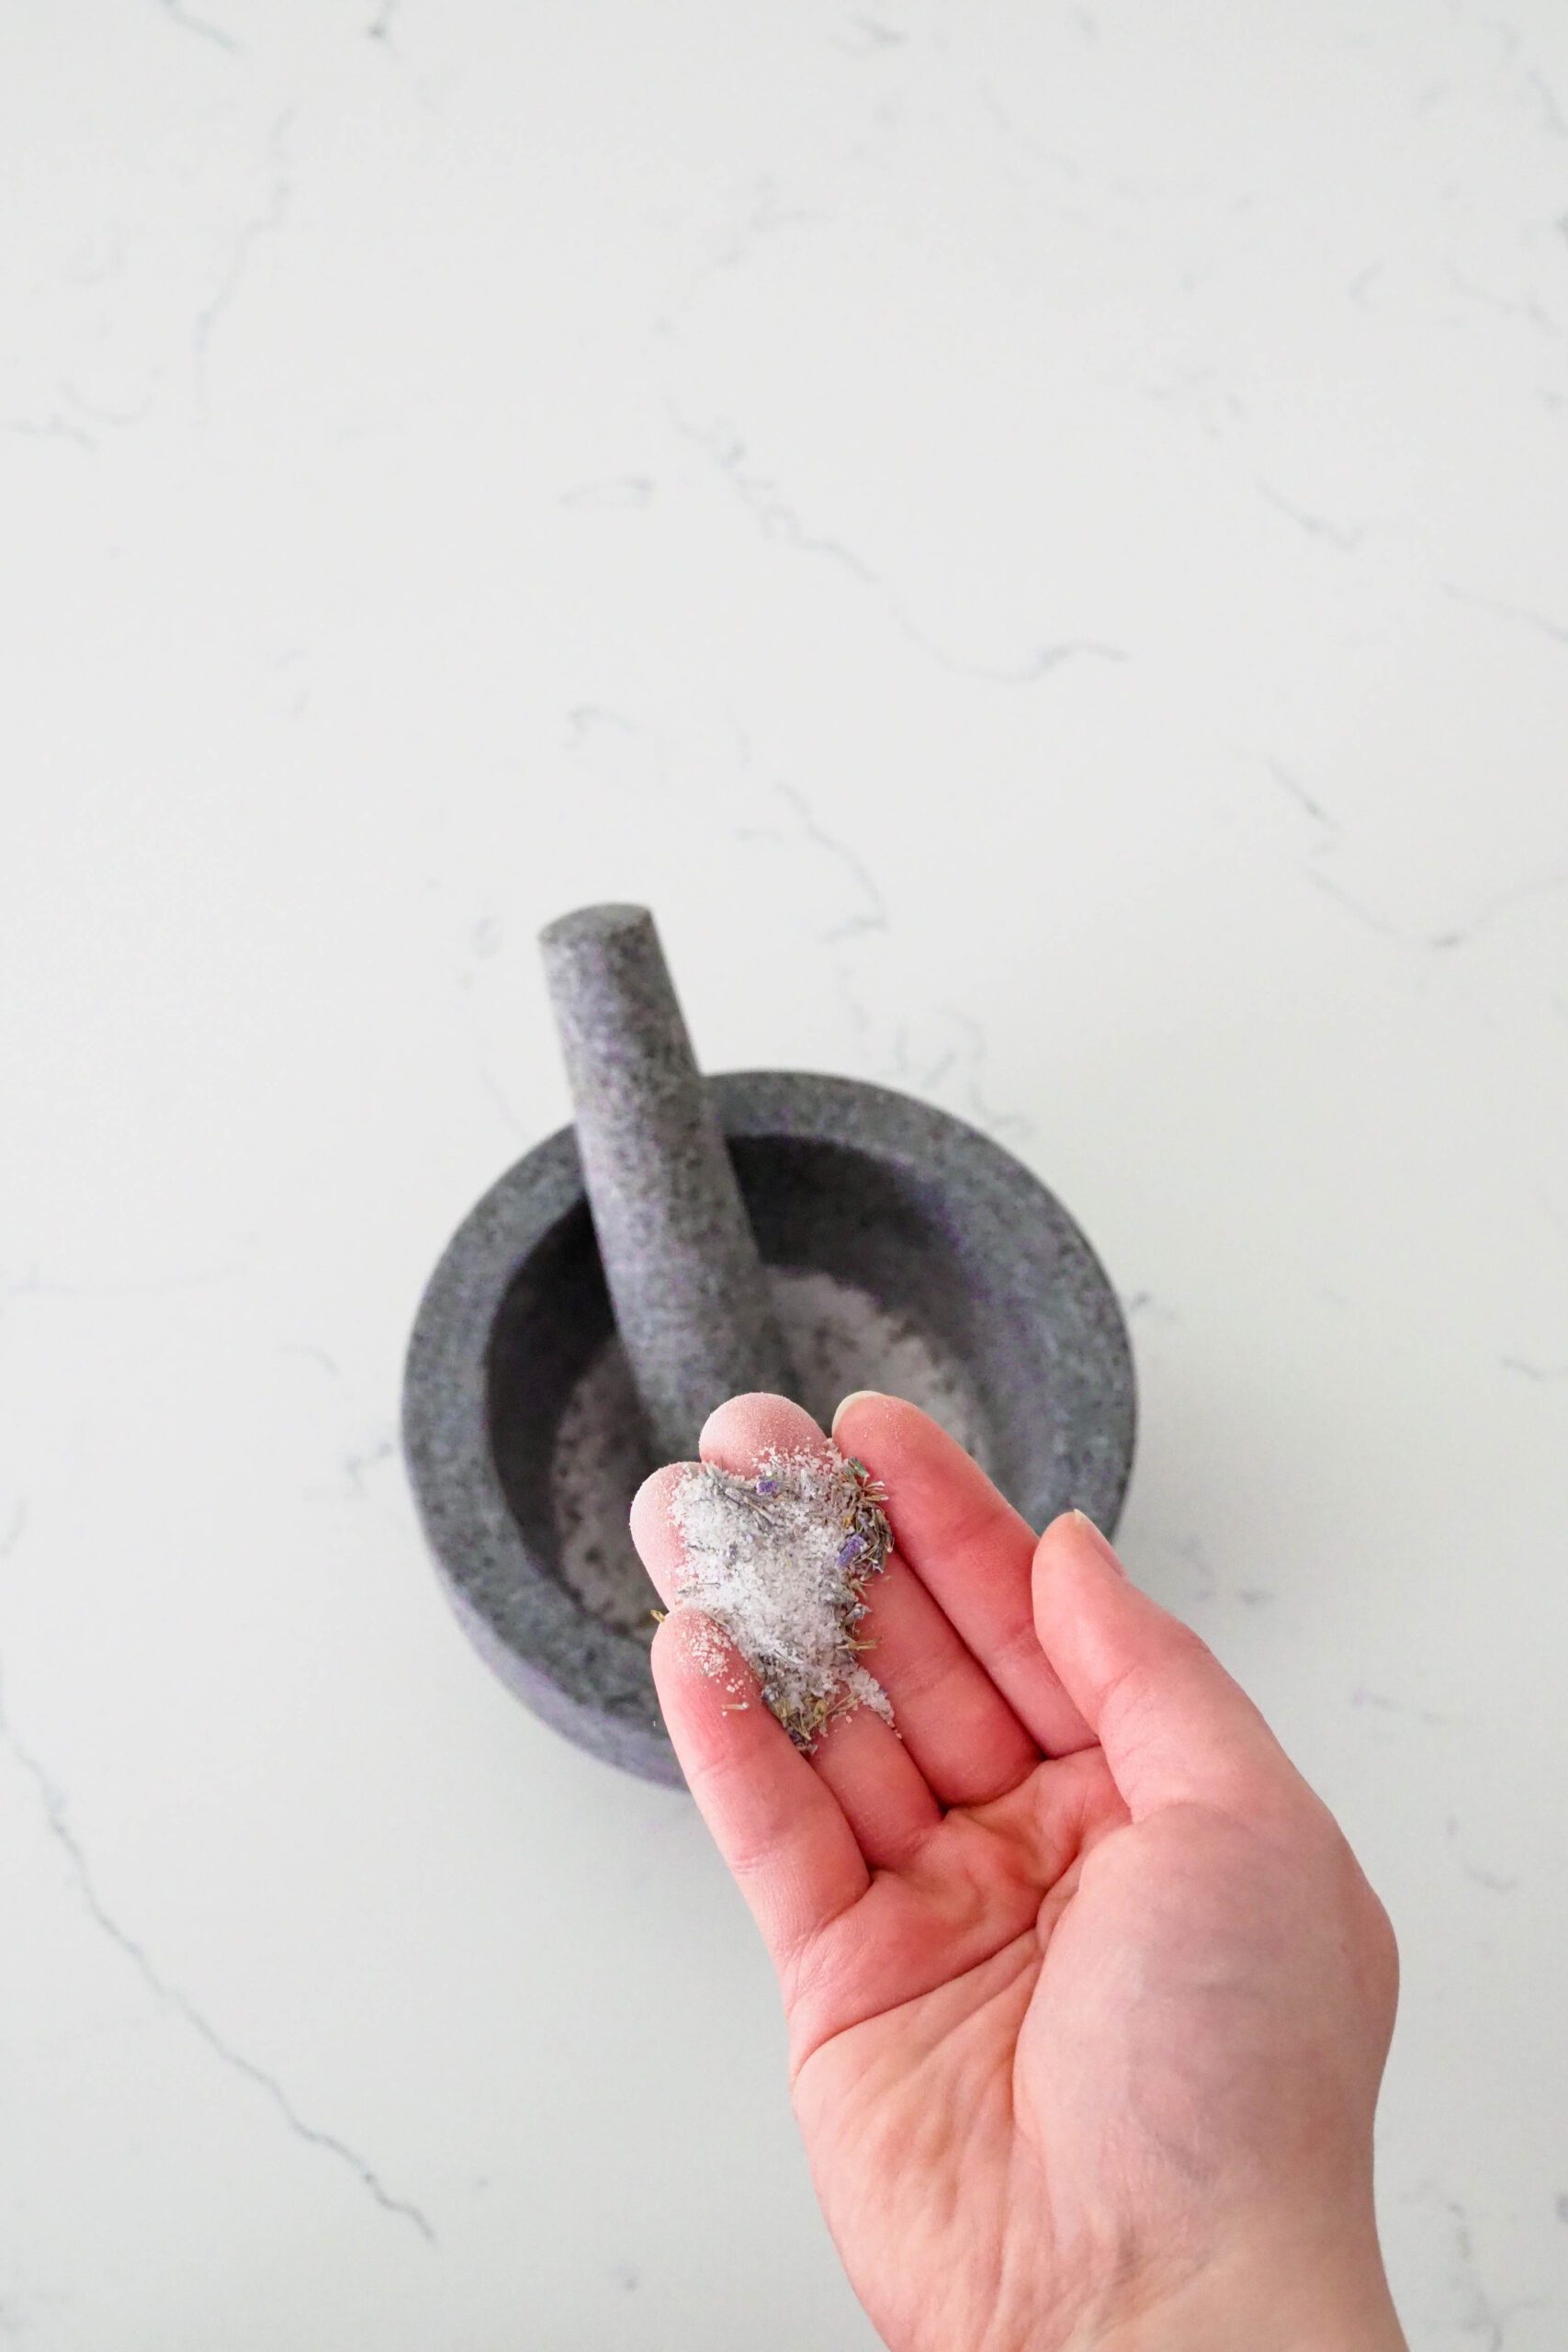 A hand holds up lavender sugar, which has been ground together in a mortar and pestle.